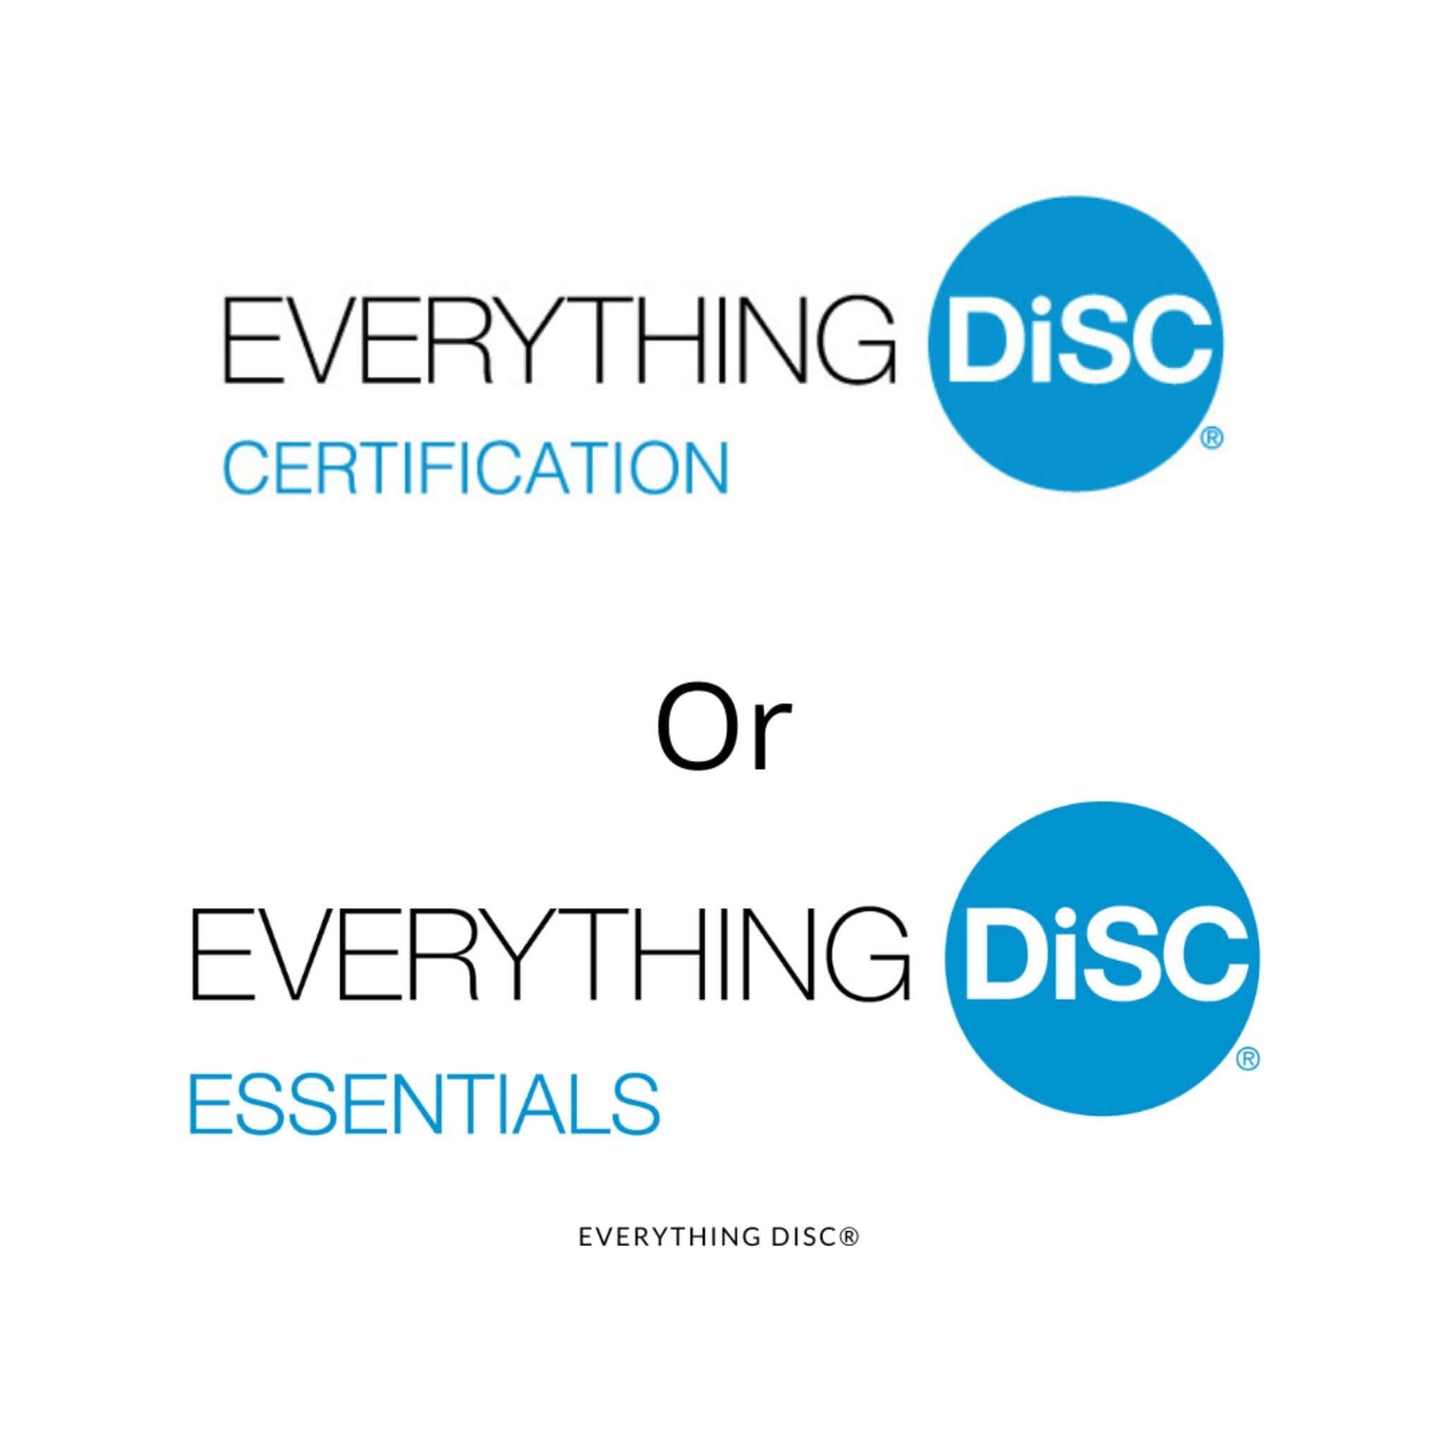 Everything DiSC® certification